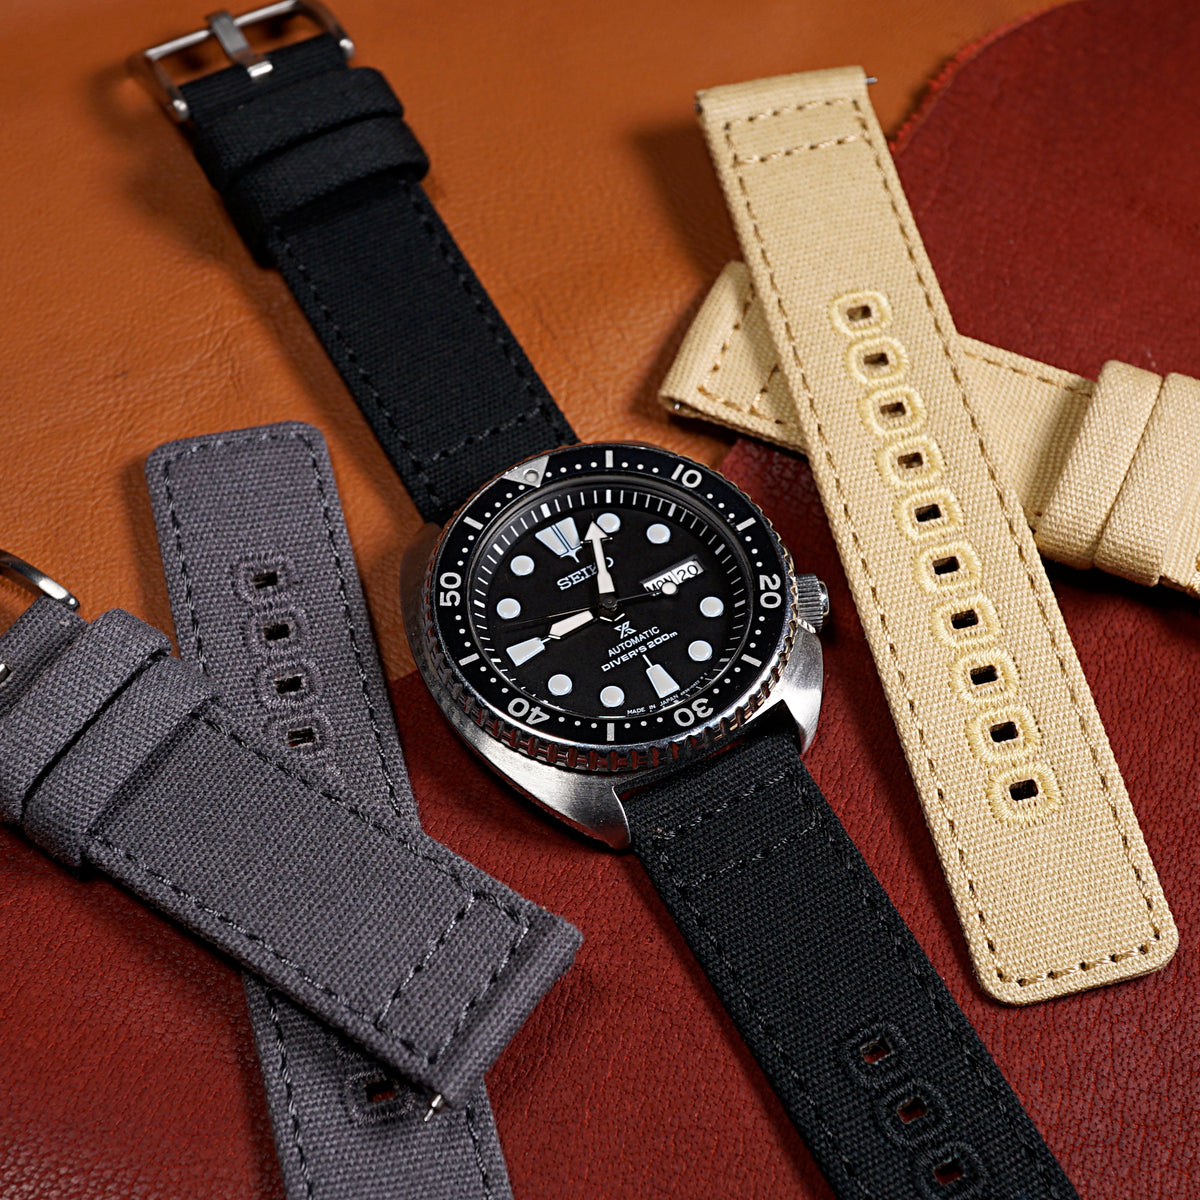 20mm, 22mm Black Quick Release Canvas Watch Strap